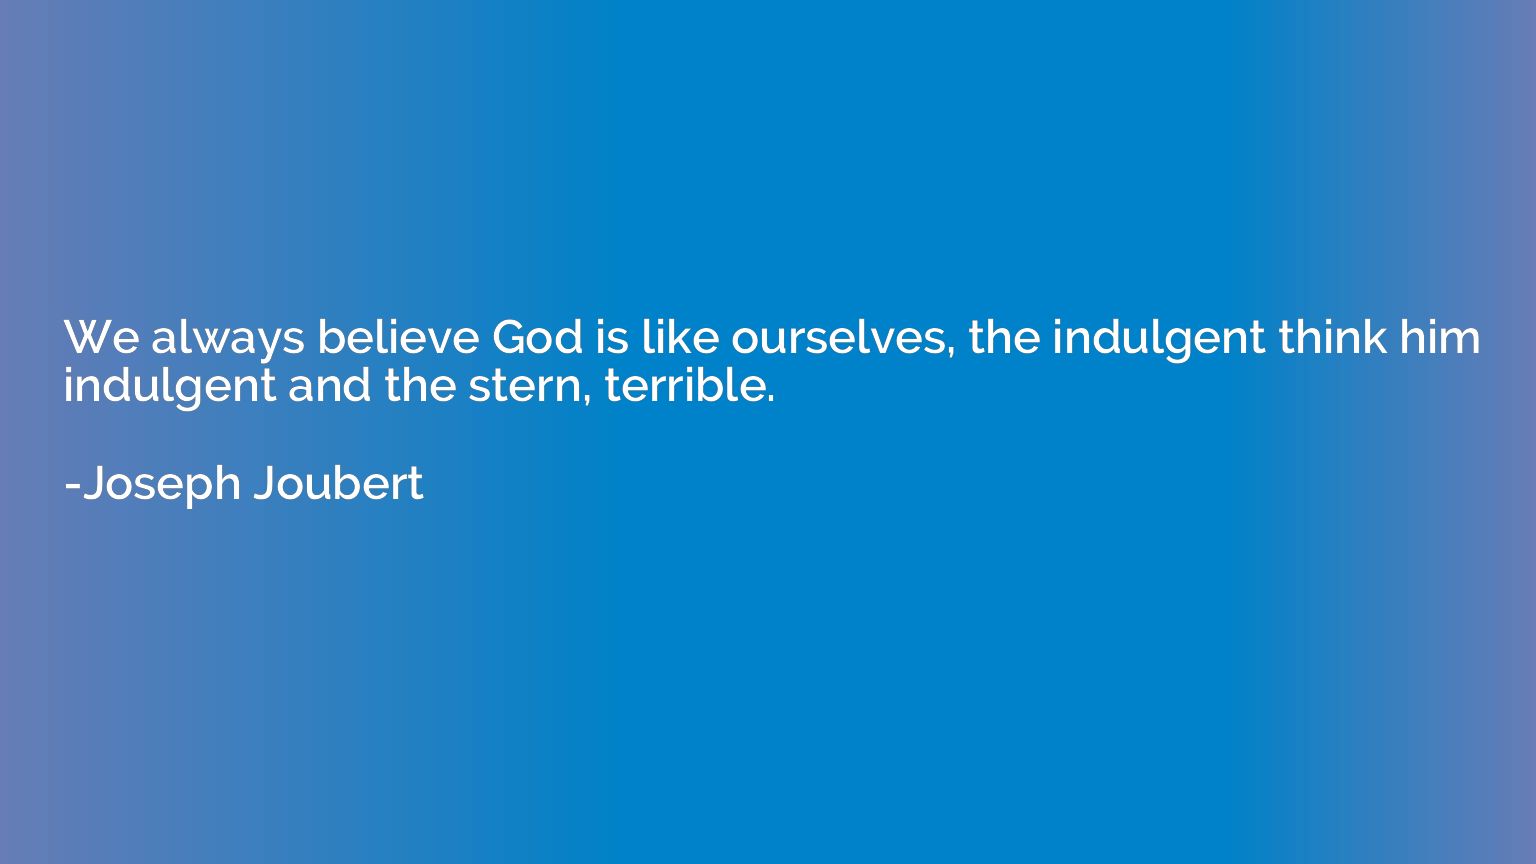 We always believe God is like ourselves, the indulgent think